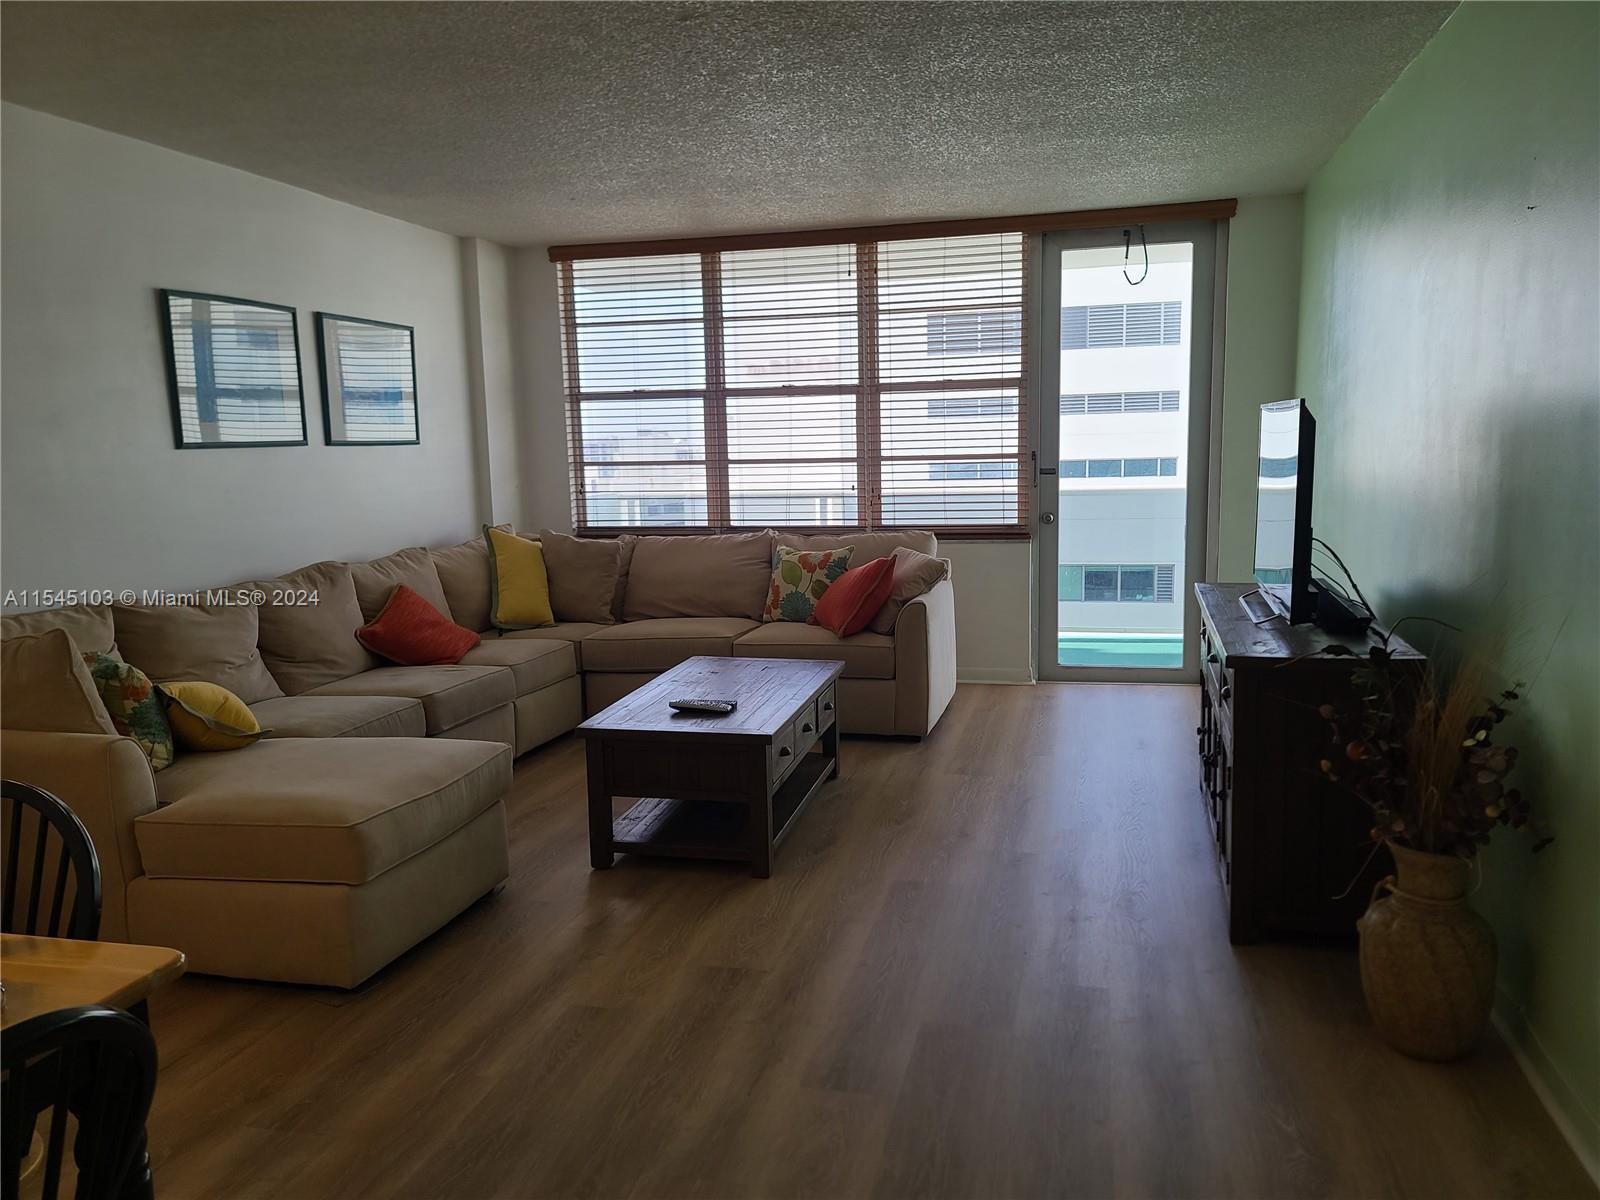 Photo of 3725 S Ocean Dr #1023 in Hollywood, FL